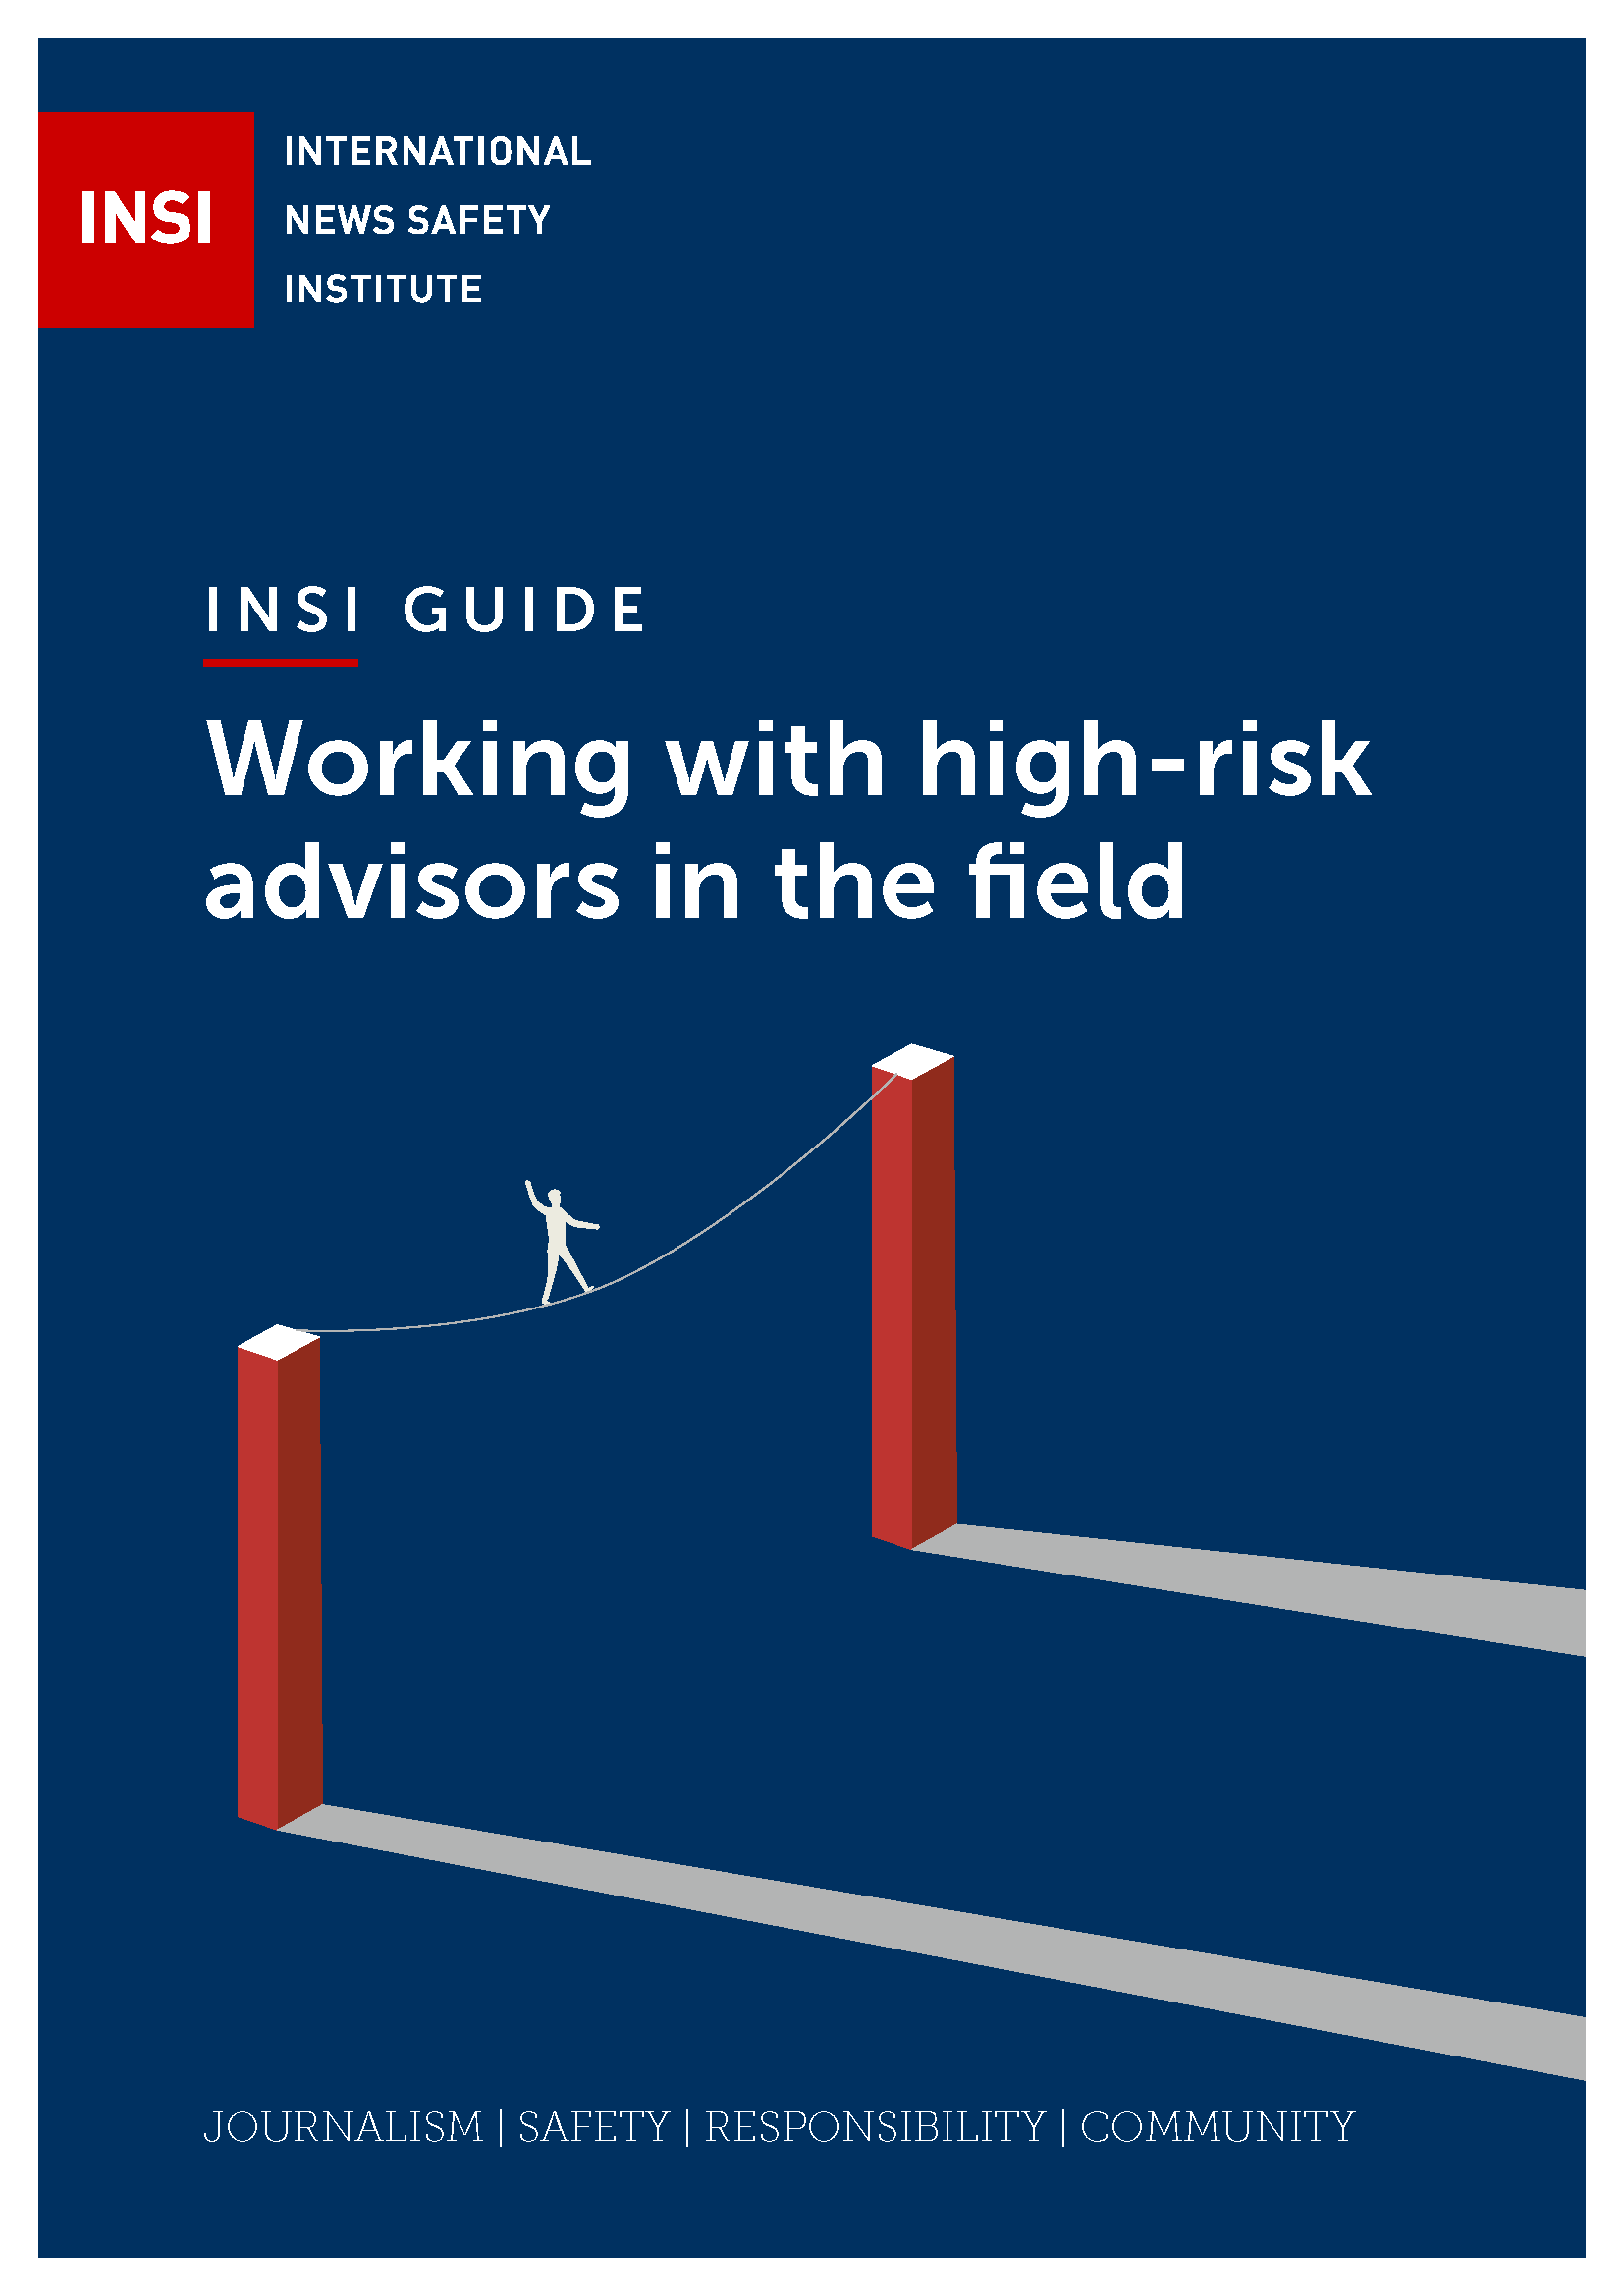 <p>INSI guide to working with high-risk advisors in the field</p>